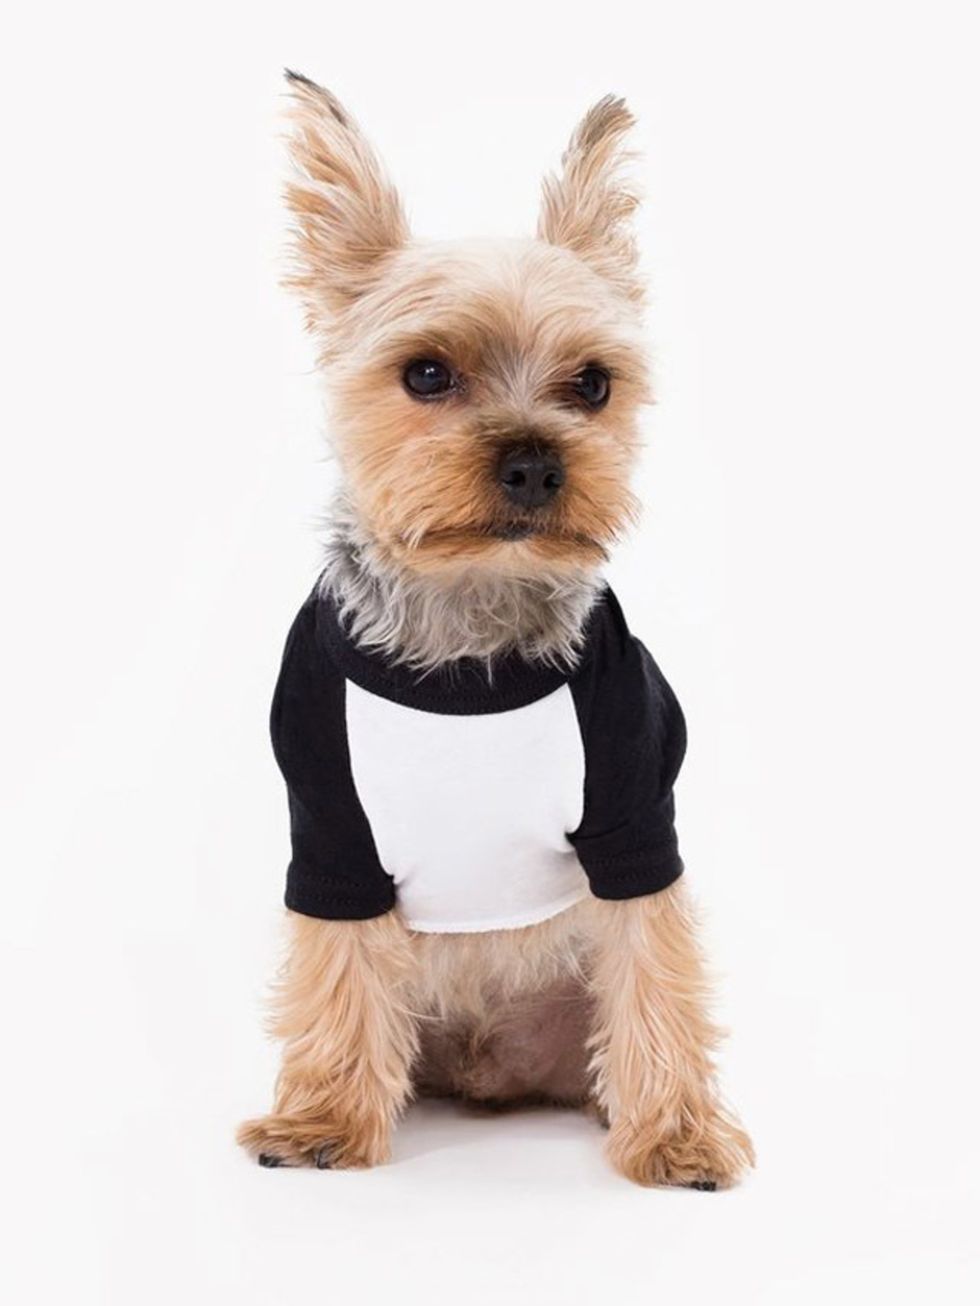 Dog breed, Dog clothes, Dog, Dog supply, Carnivore, Mammal, Small terrier, Terrier, Toy dog, Snout, 